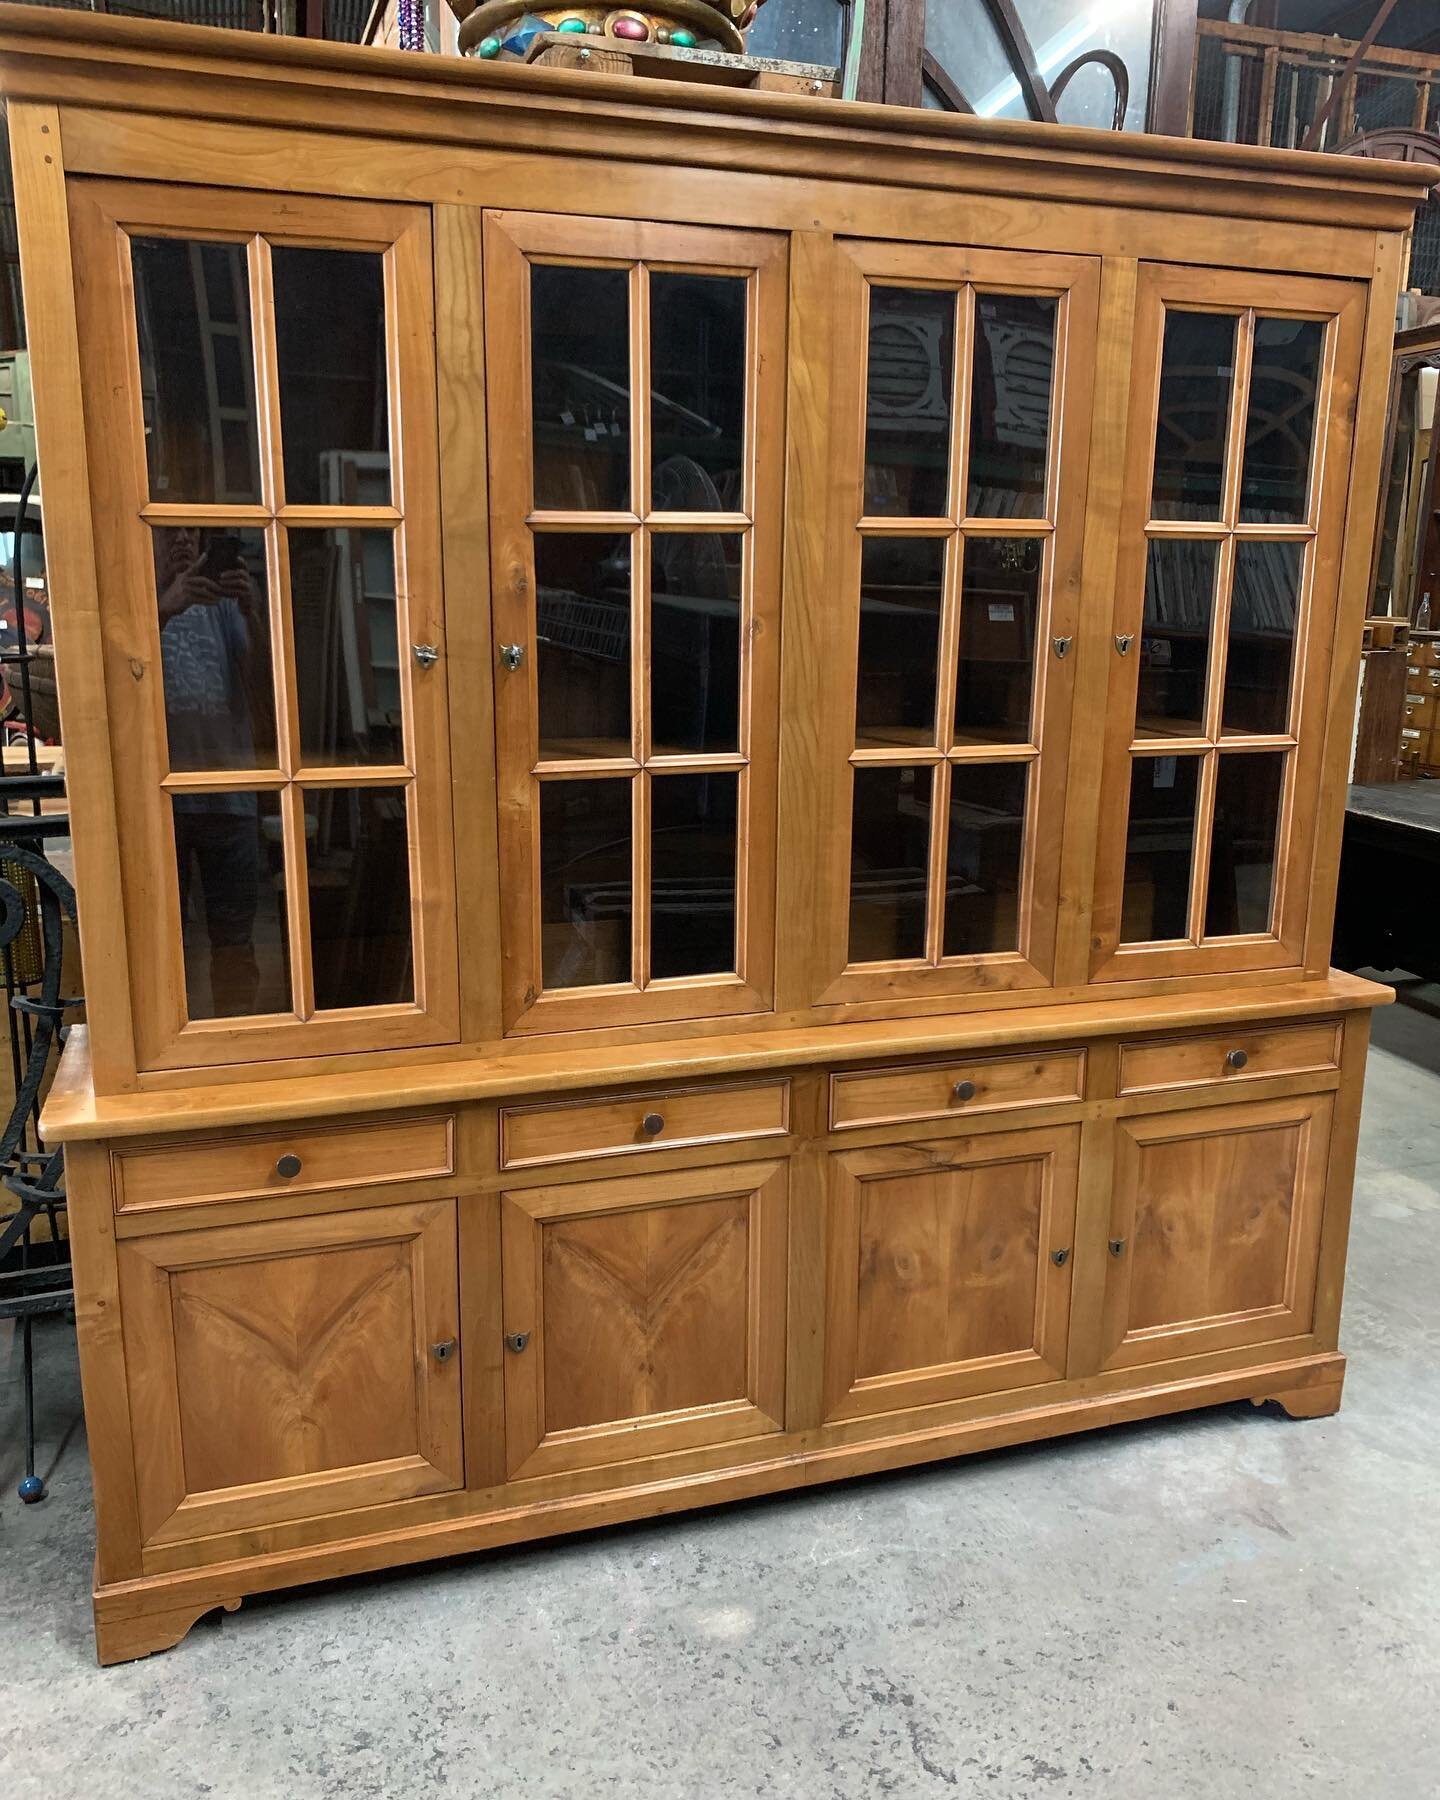 This guy is handsome. I think he would make quite a proper cabinet in a country kitchen&hellip;
86.75&rdquo;w x 86h x 18d. 💰5500.00  #vintage #salvage #design #interiors #shoptampa #southtampa #shoplocal